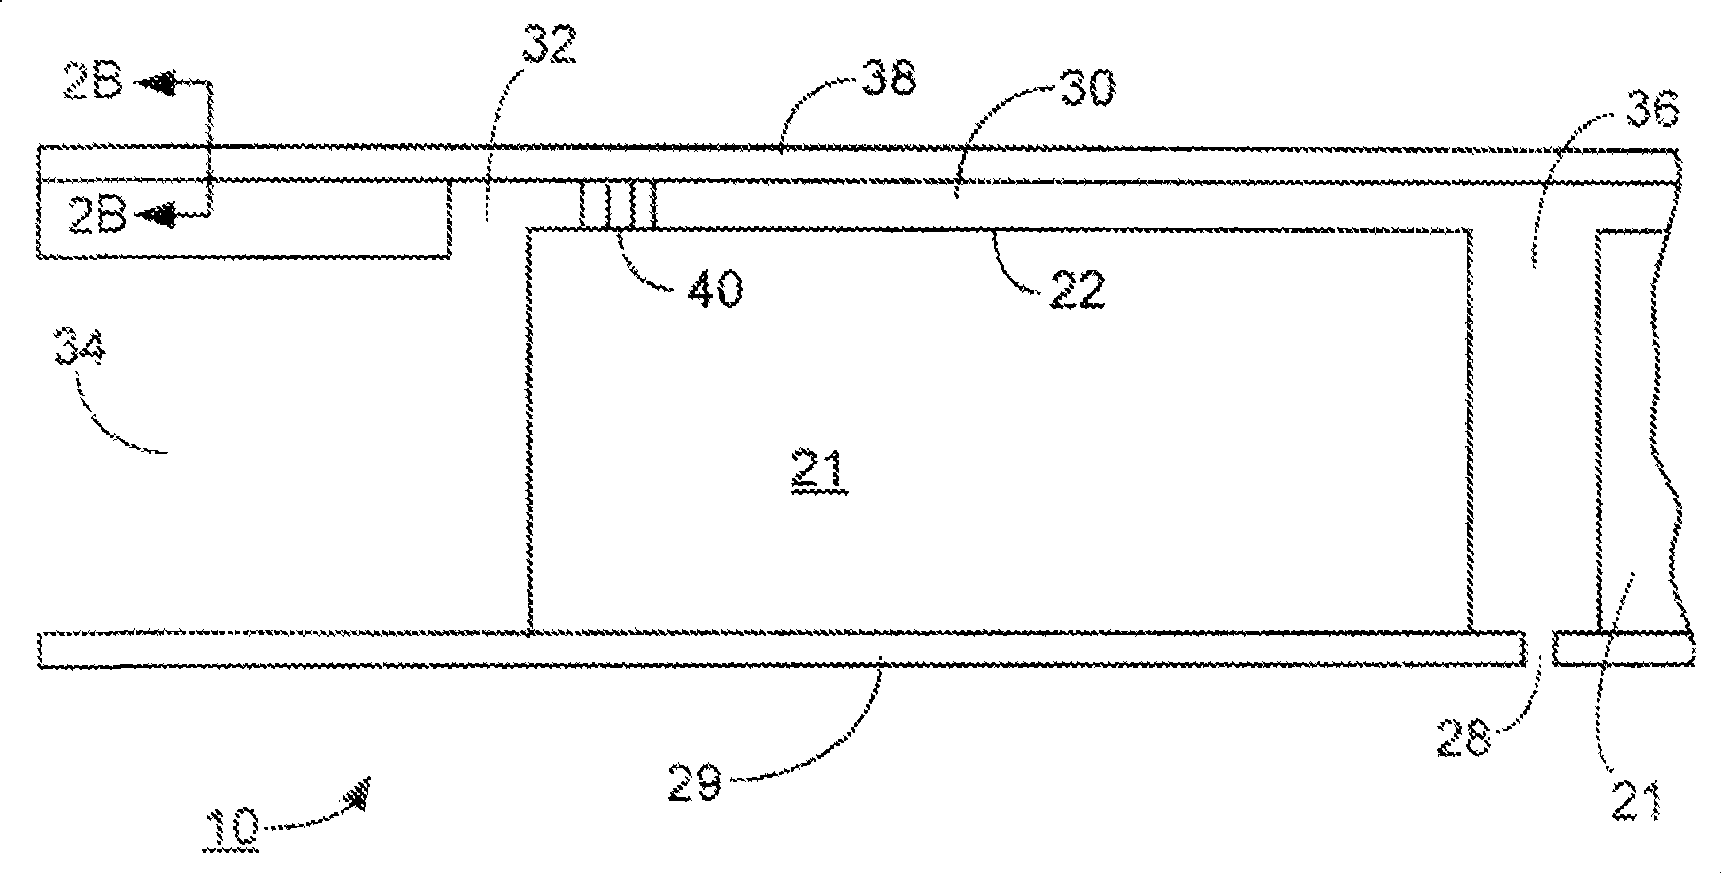 Fluid droplet ejection devices and methods